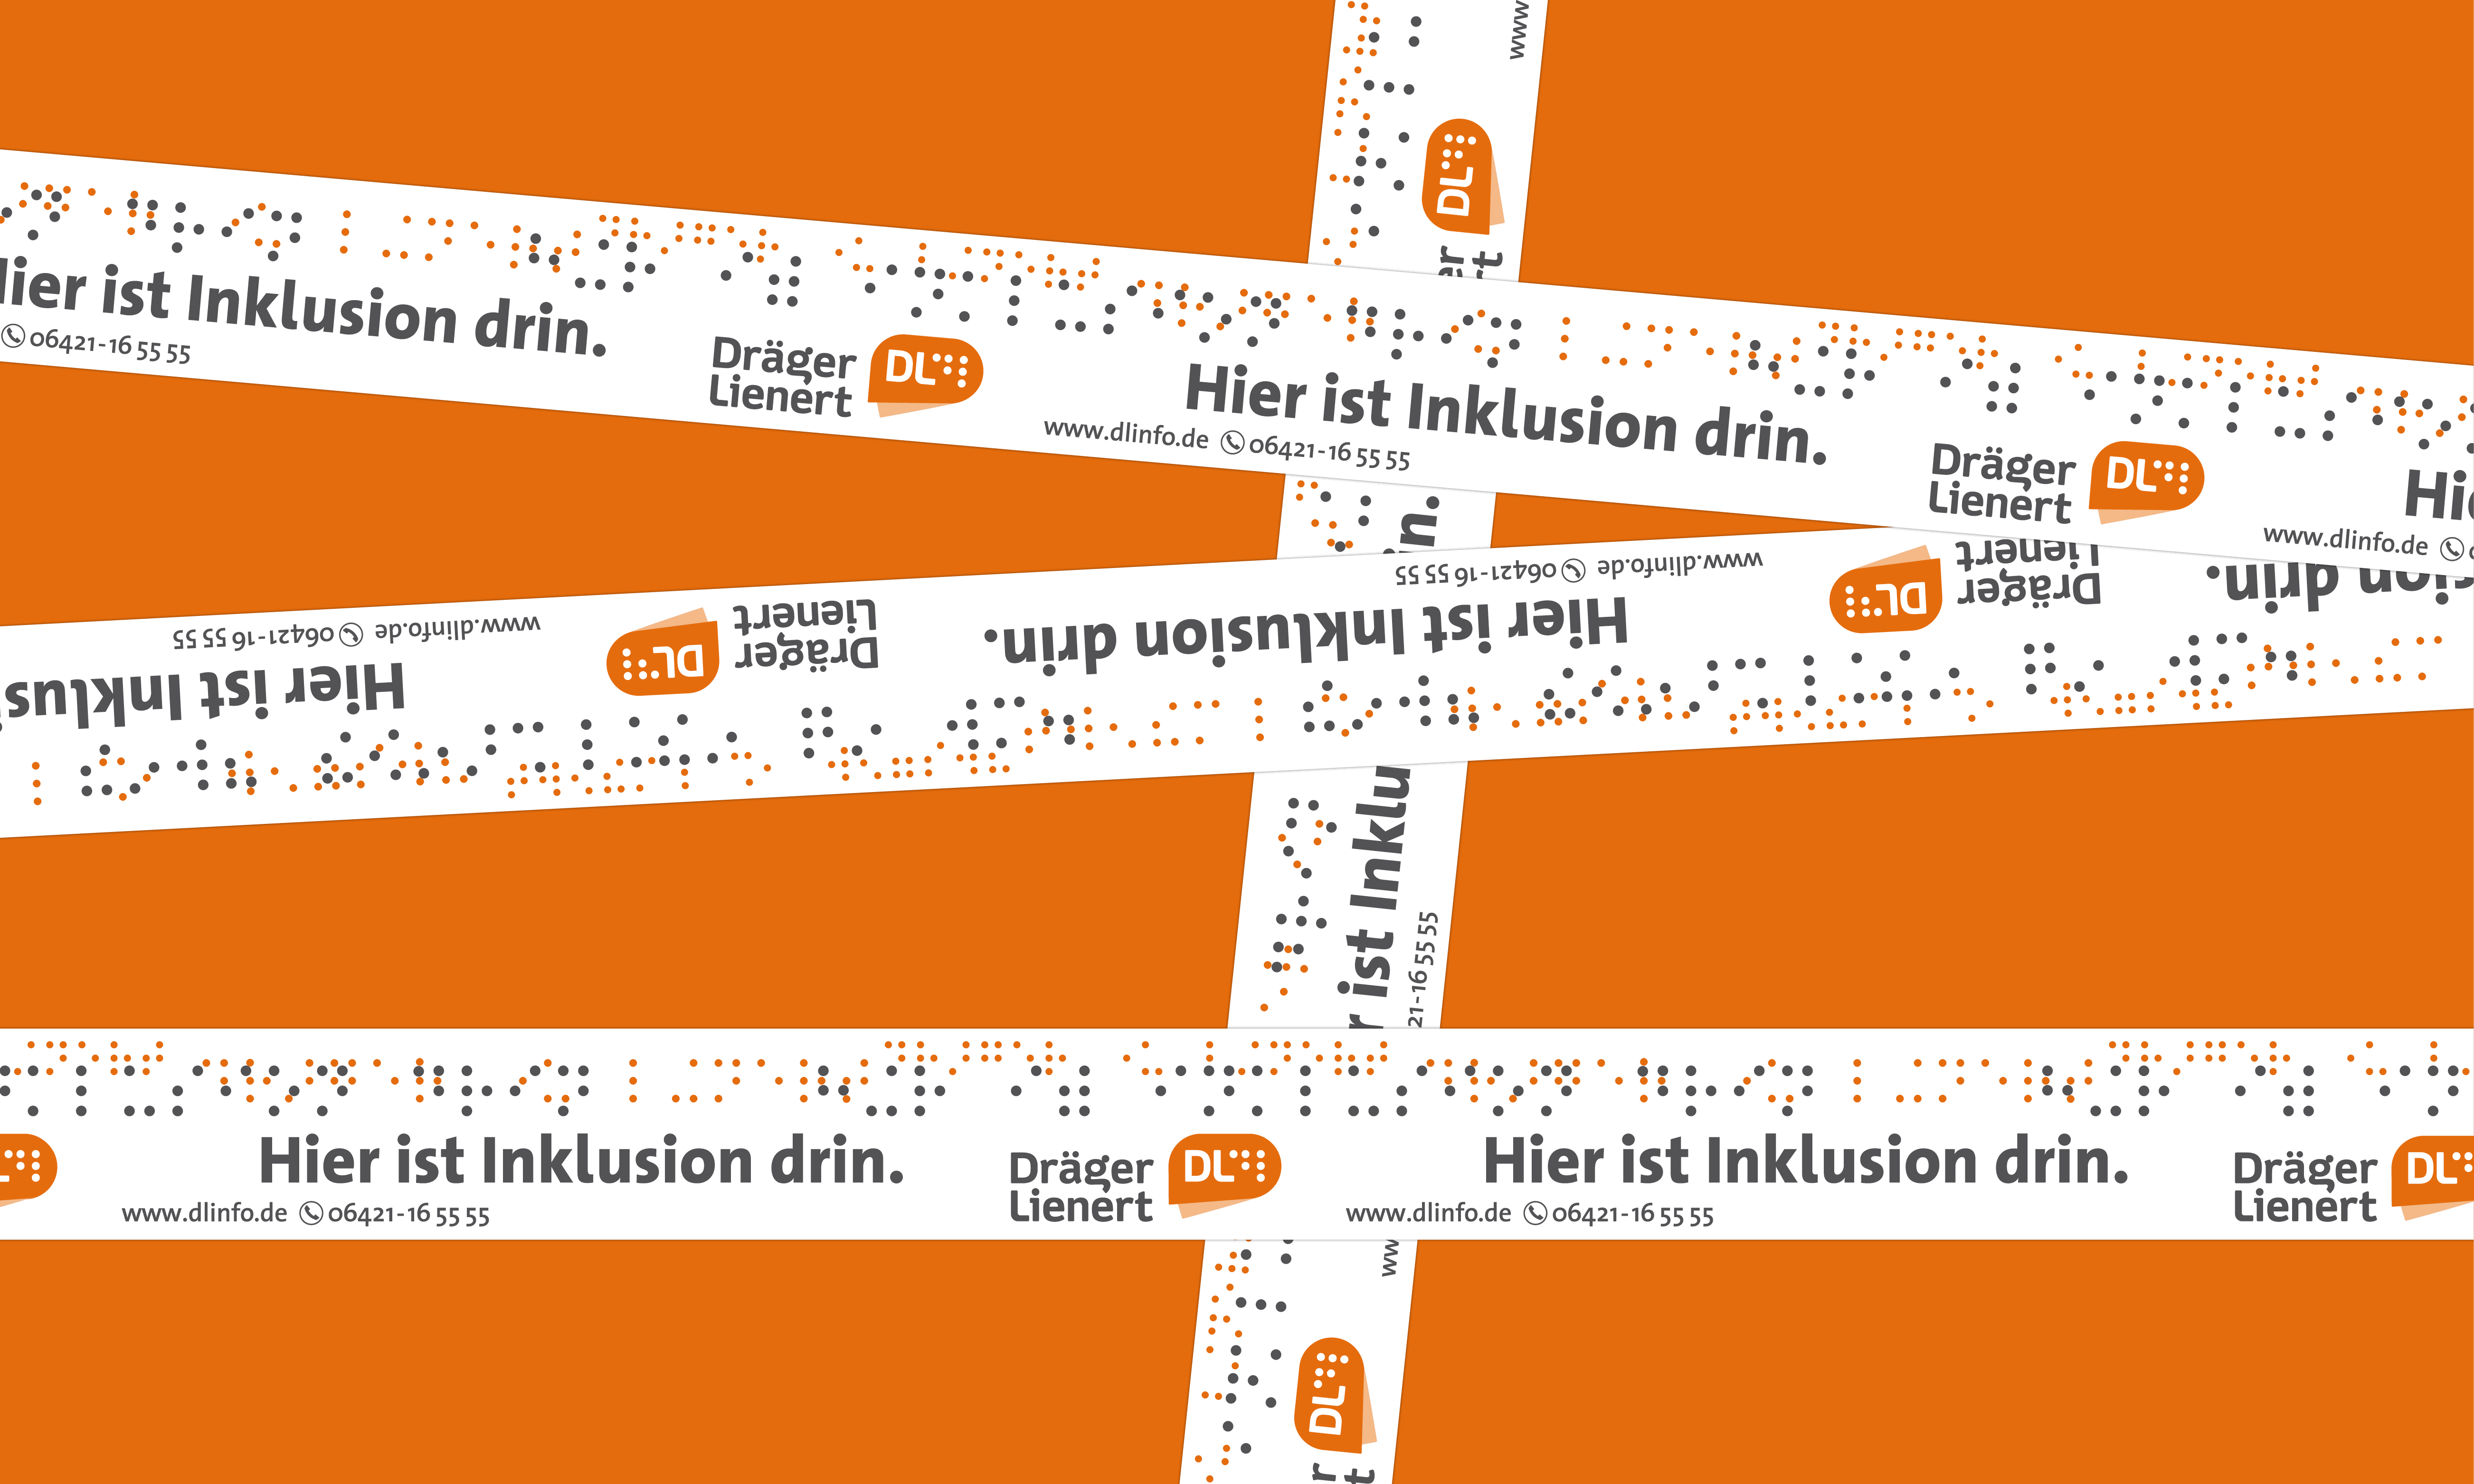 Representation of the packaging tape as an advertising medium with the slogan "Inclusion is in here".